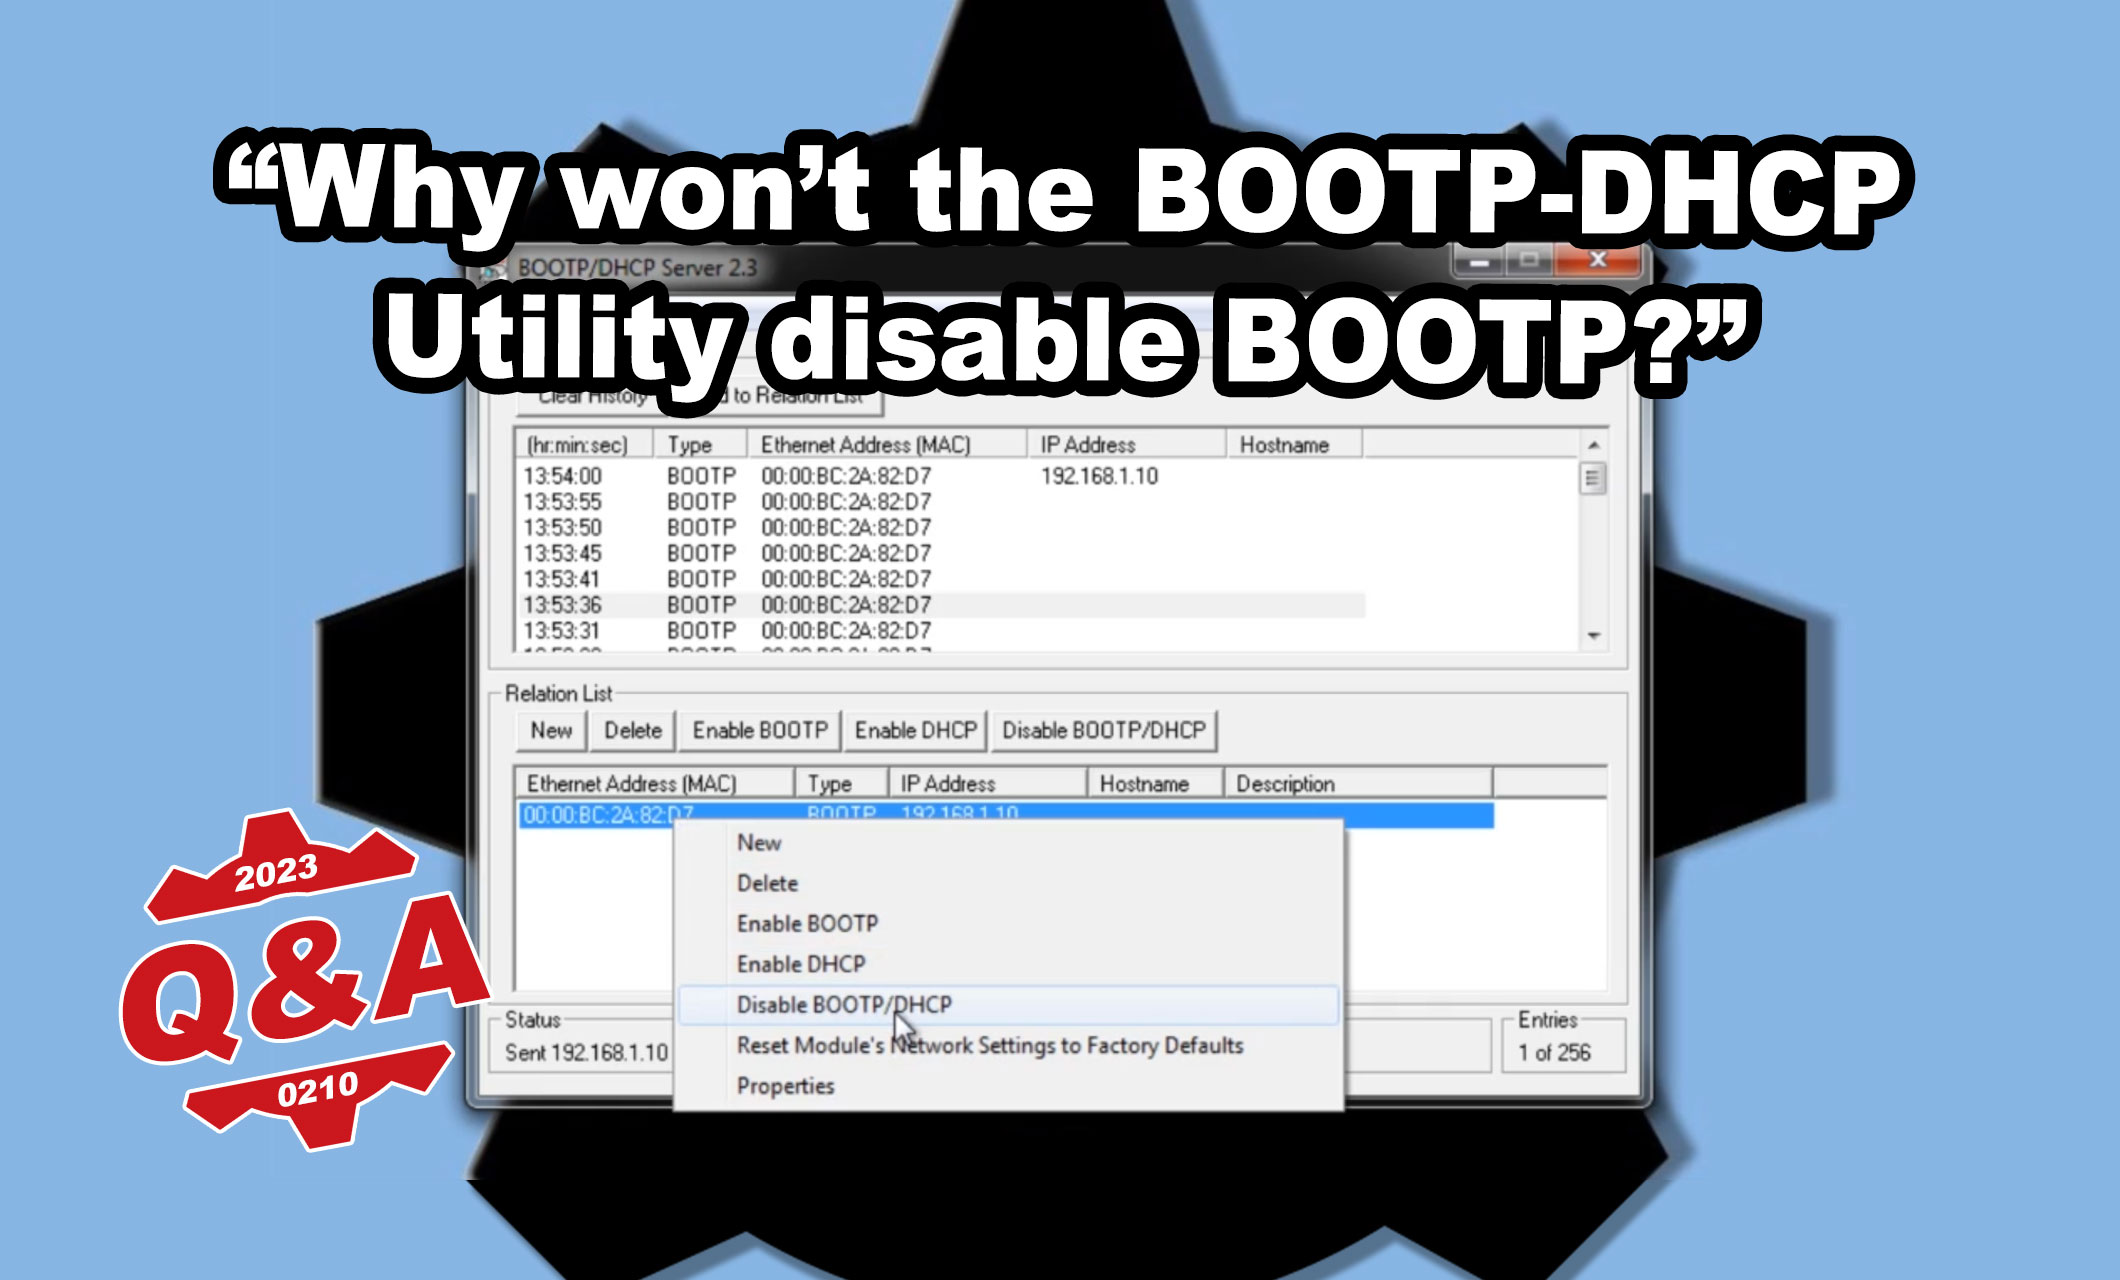 BOOTP-DHCP Utility - Why Won't It Disable BOOTP? (qa230210)